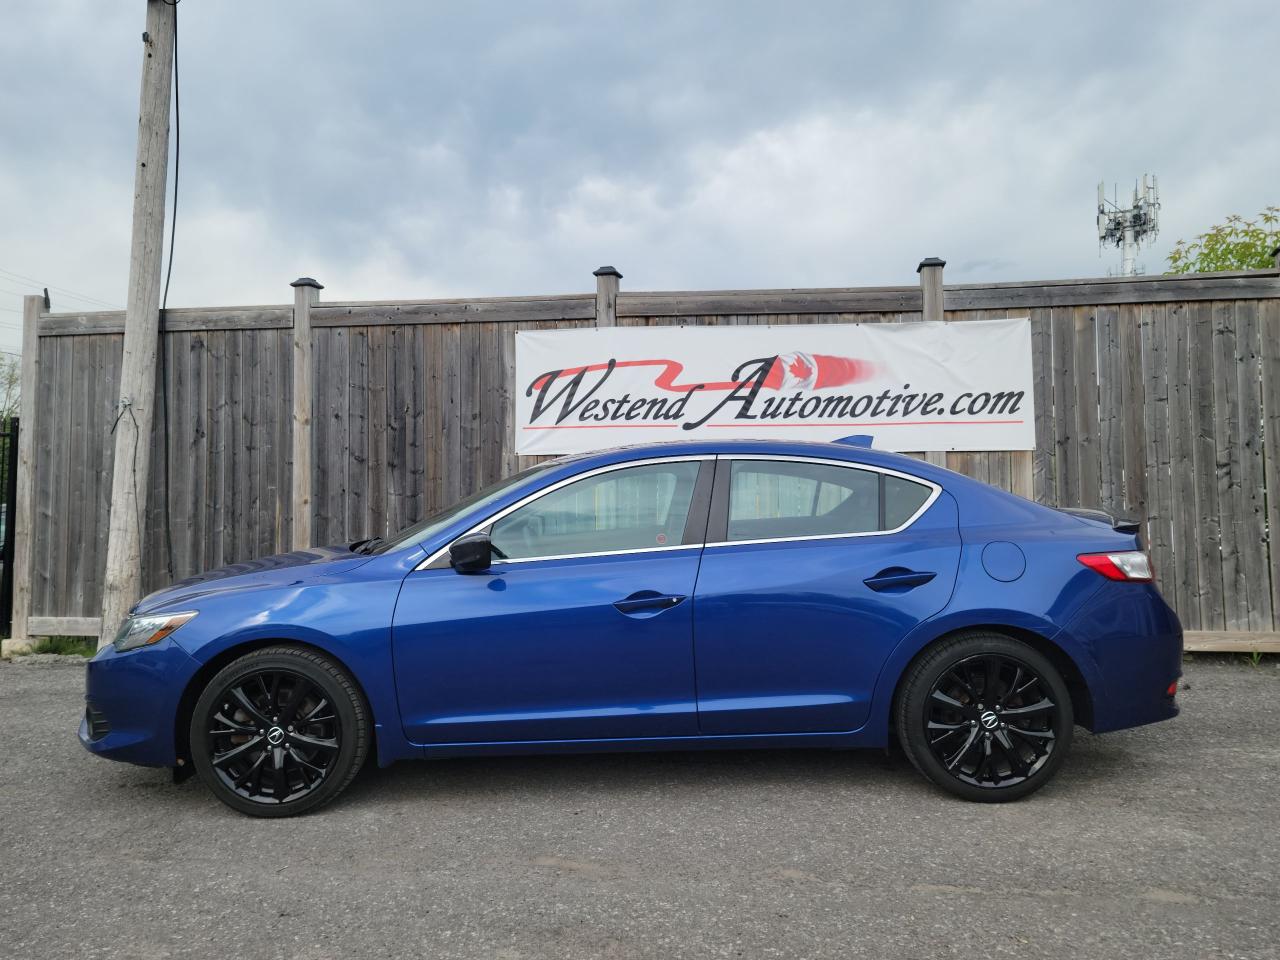 2017 Acura ILX Technology Pkg , Sunroof , Only 75000 Kms - Photo #2